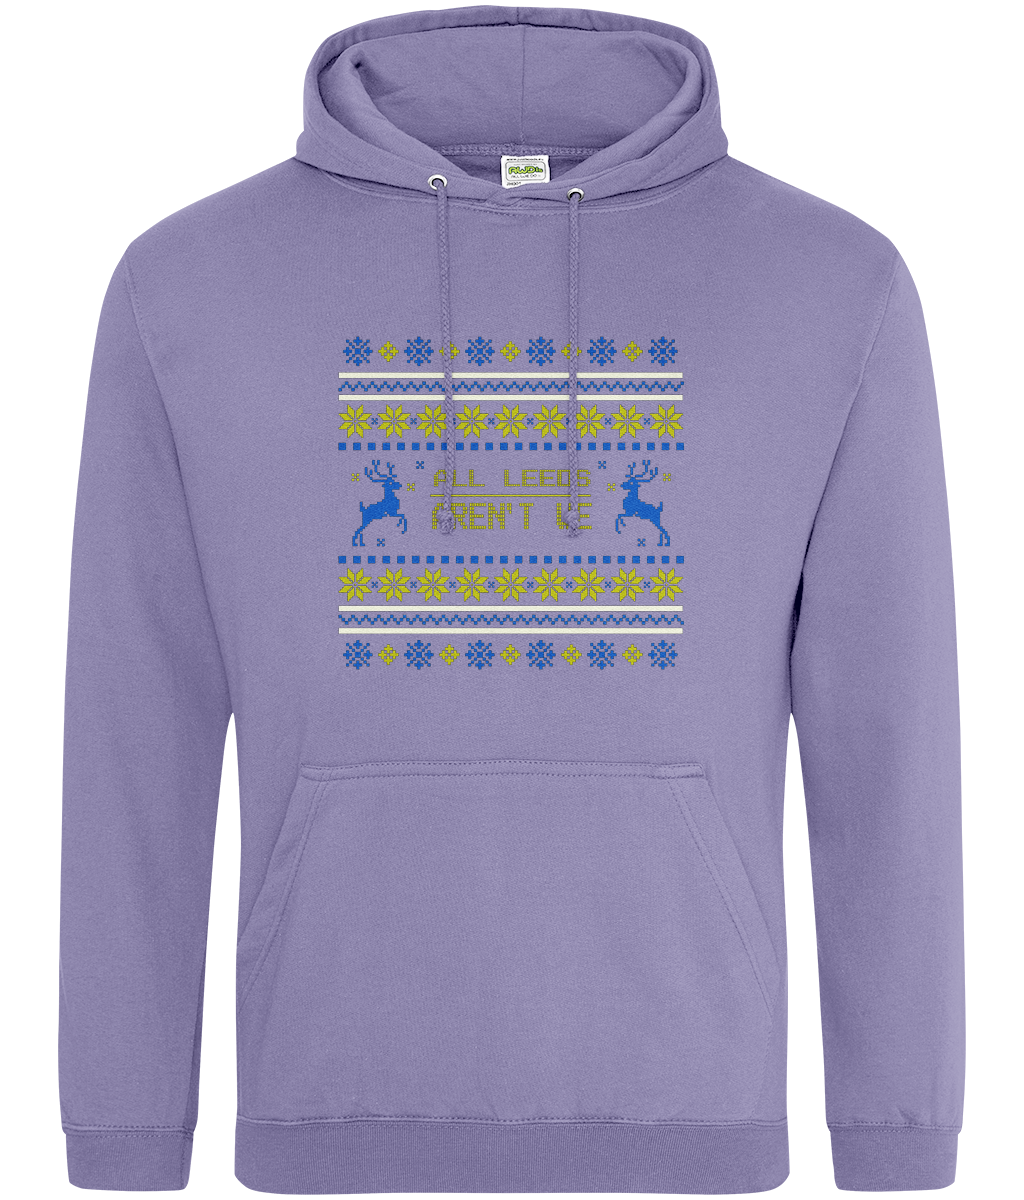 All Leeds Aren't We Christmas Hoodie Blue and Yellow Women